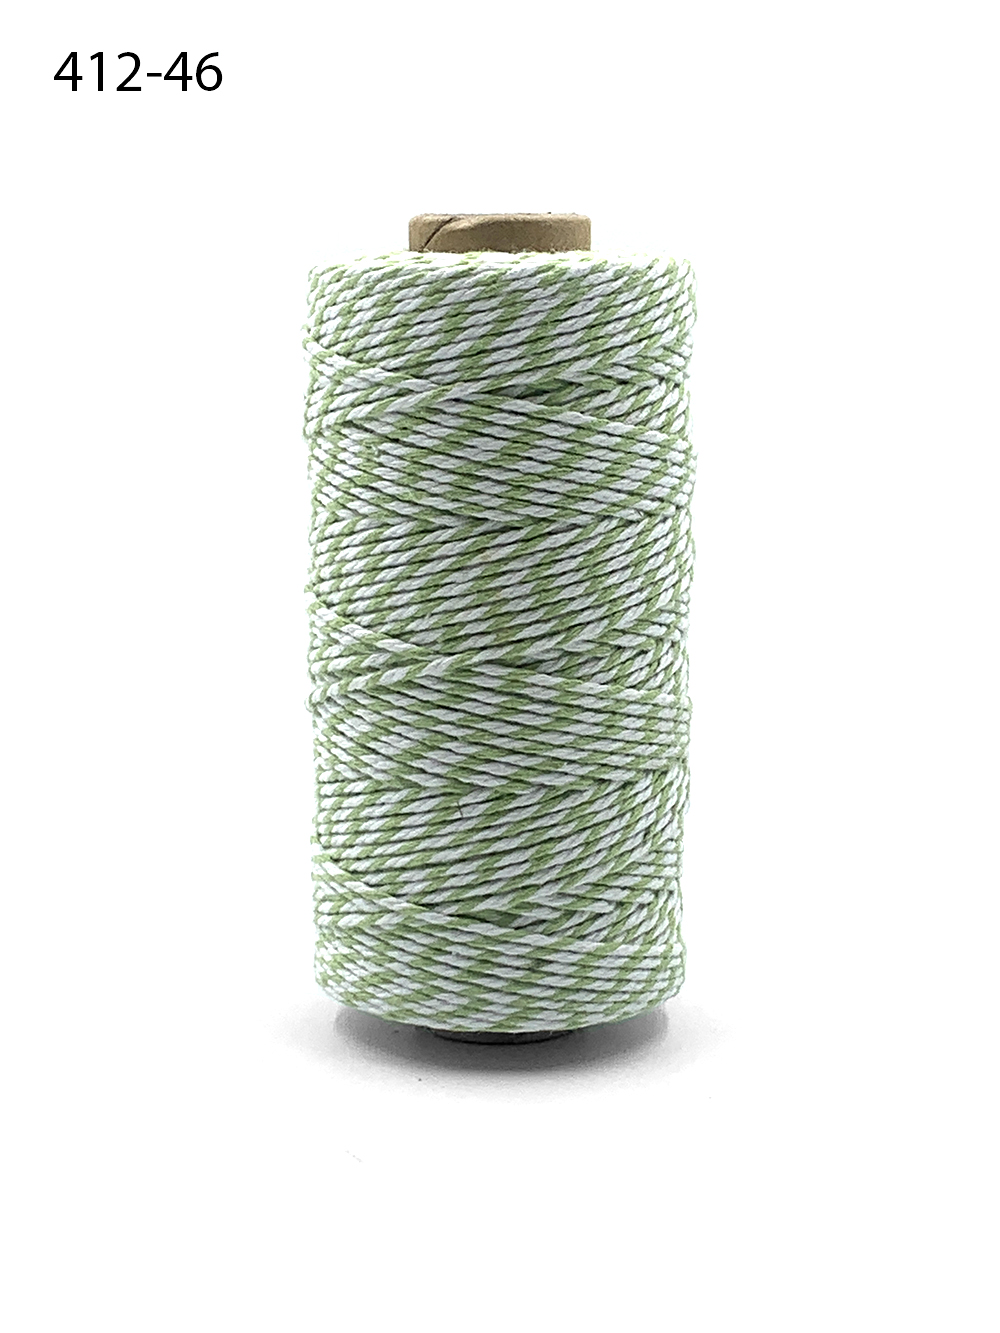  Colored Twine